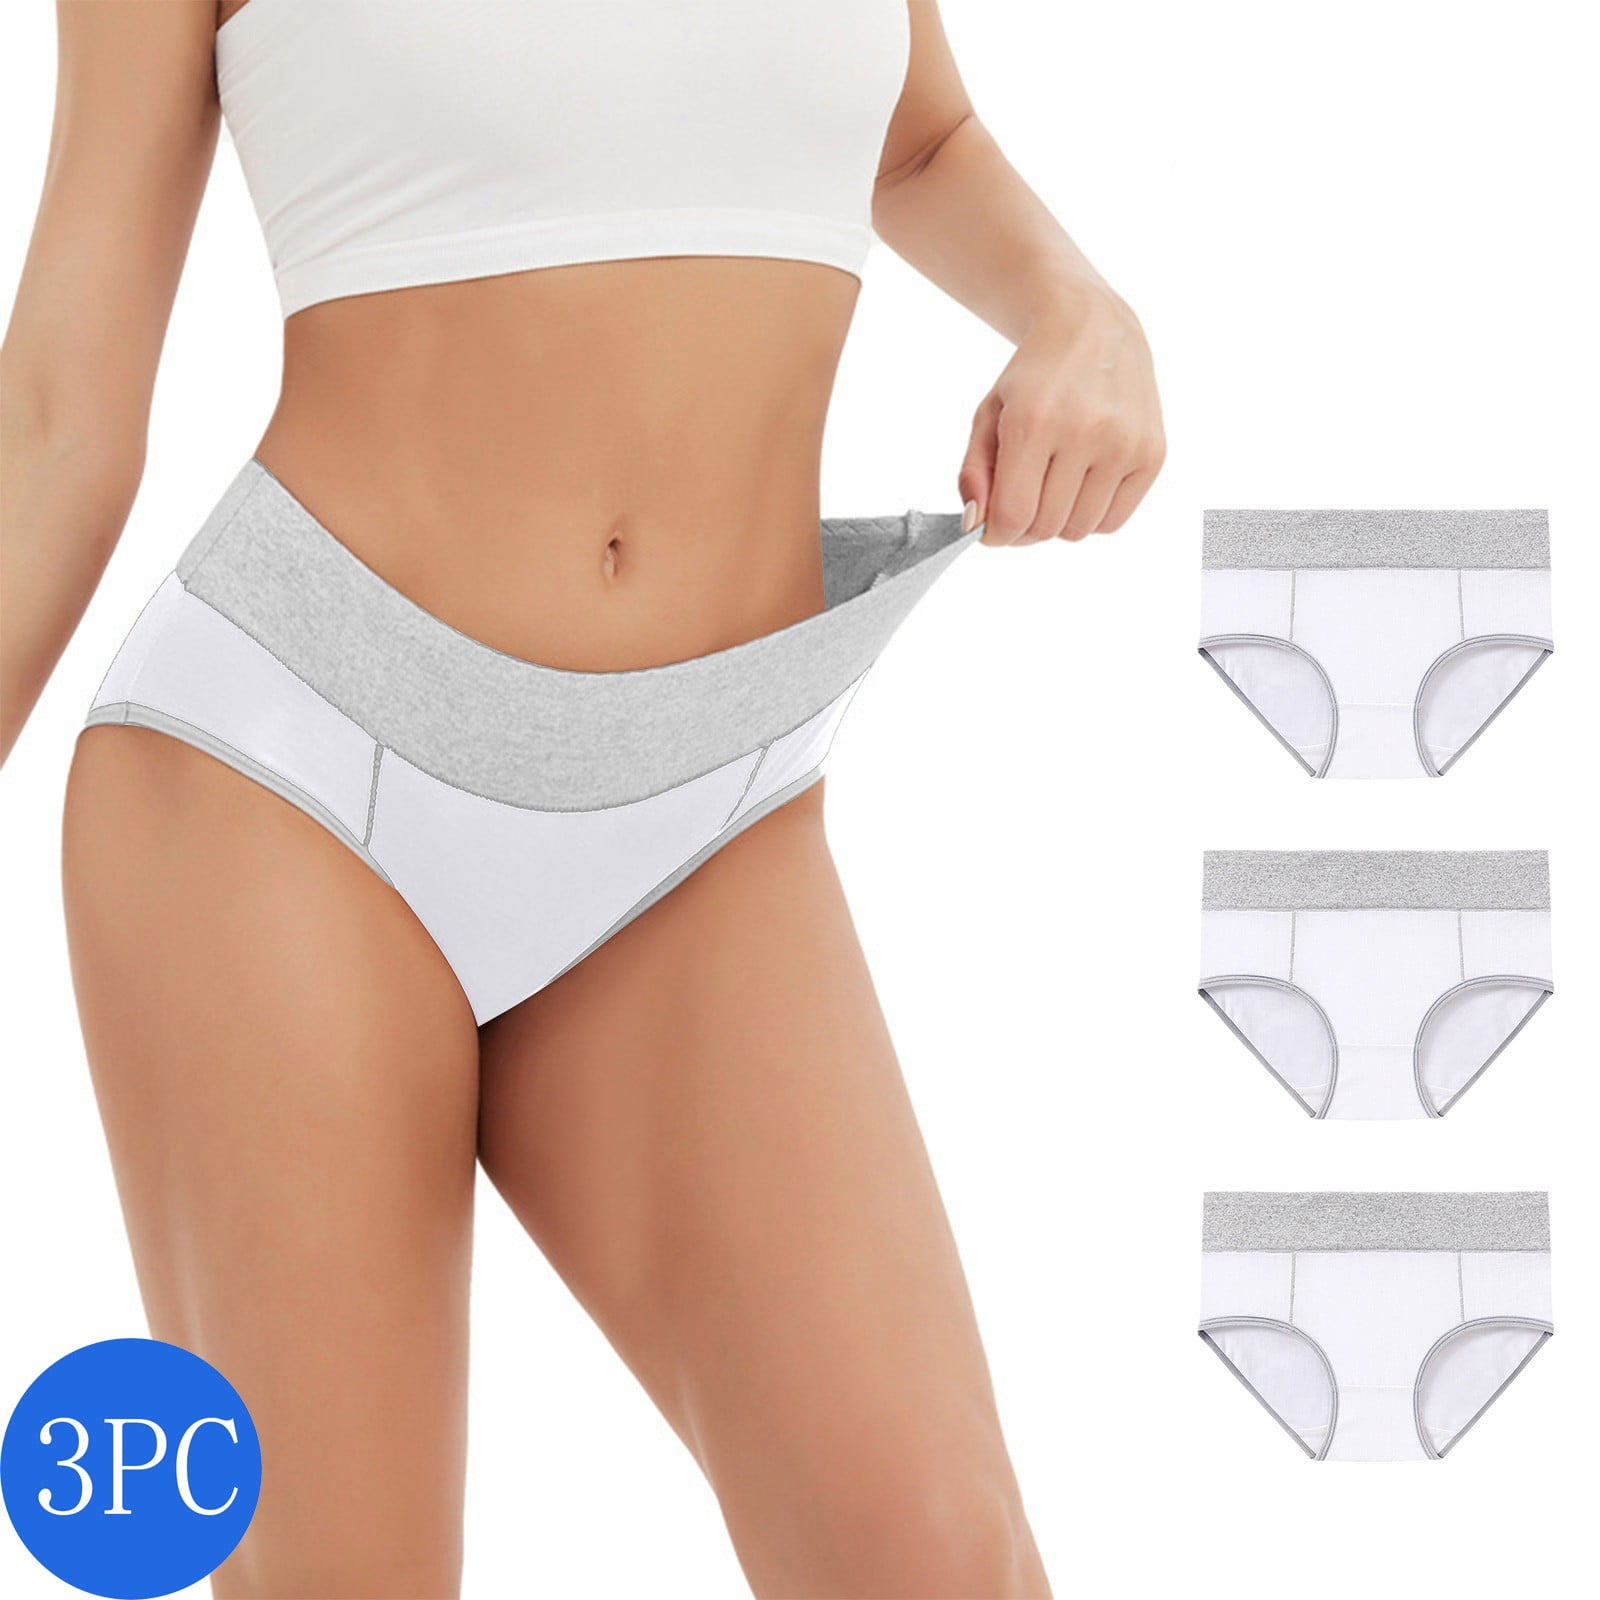 Brief Underwear for Women Contrast Binding Colorblock Top-stitching Brief  Panties Colorblock Top-stitching Brief Cotton Lift Buttocks Underwear For  Women QIPOPIQ Clearance 